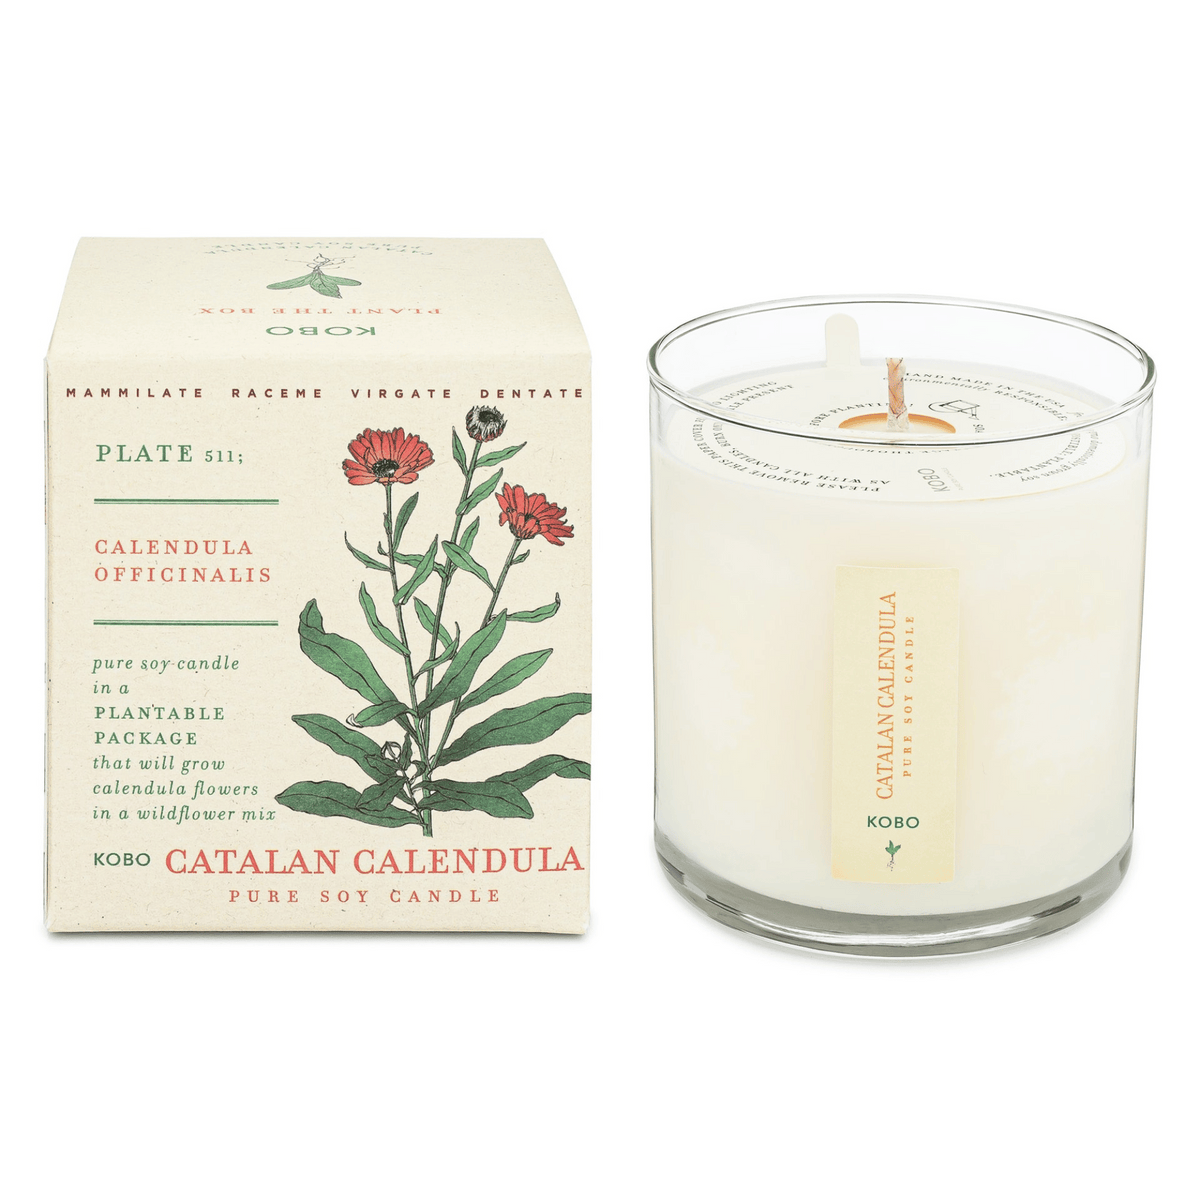 Primary Image of Catalan Calendula Plant the Box Candle